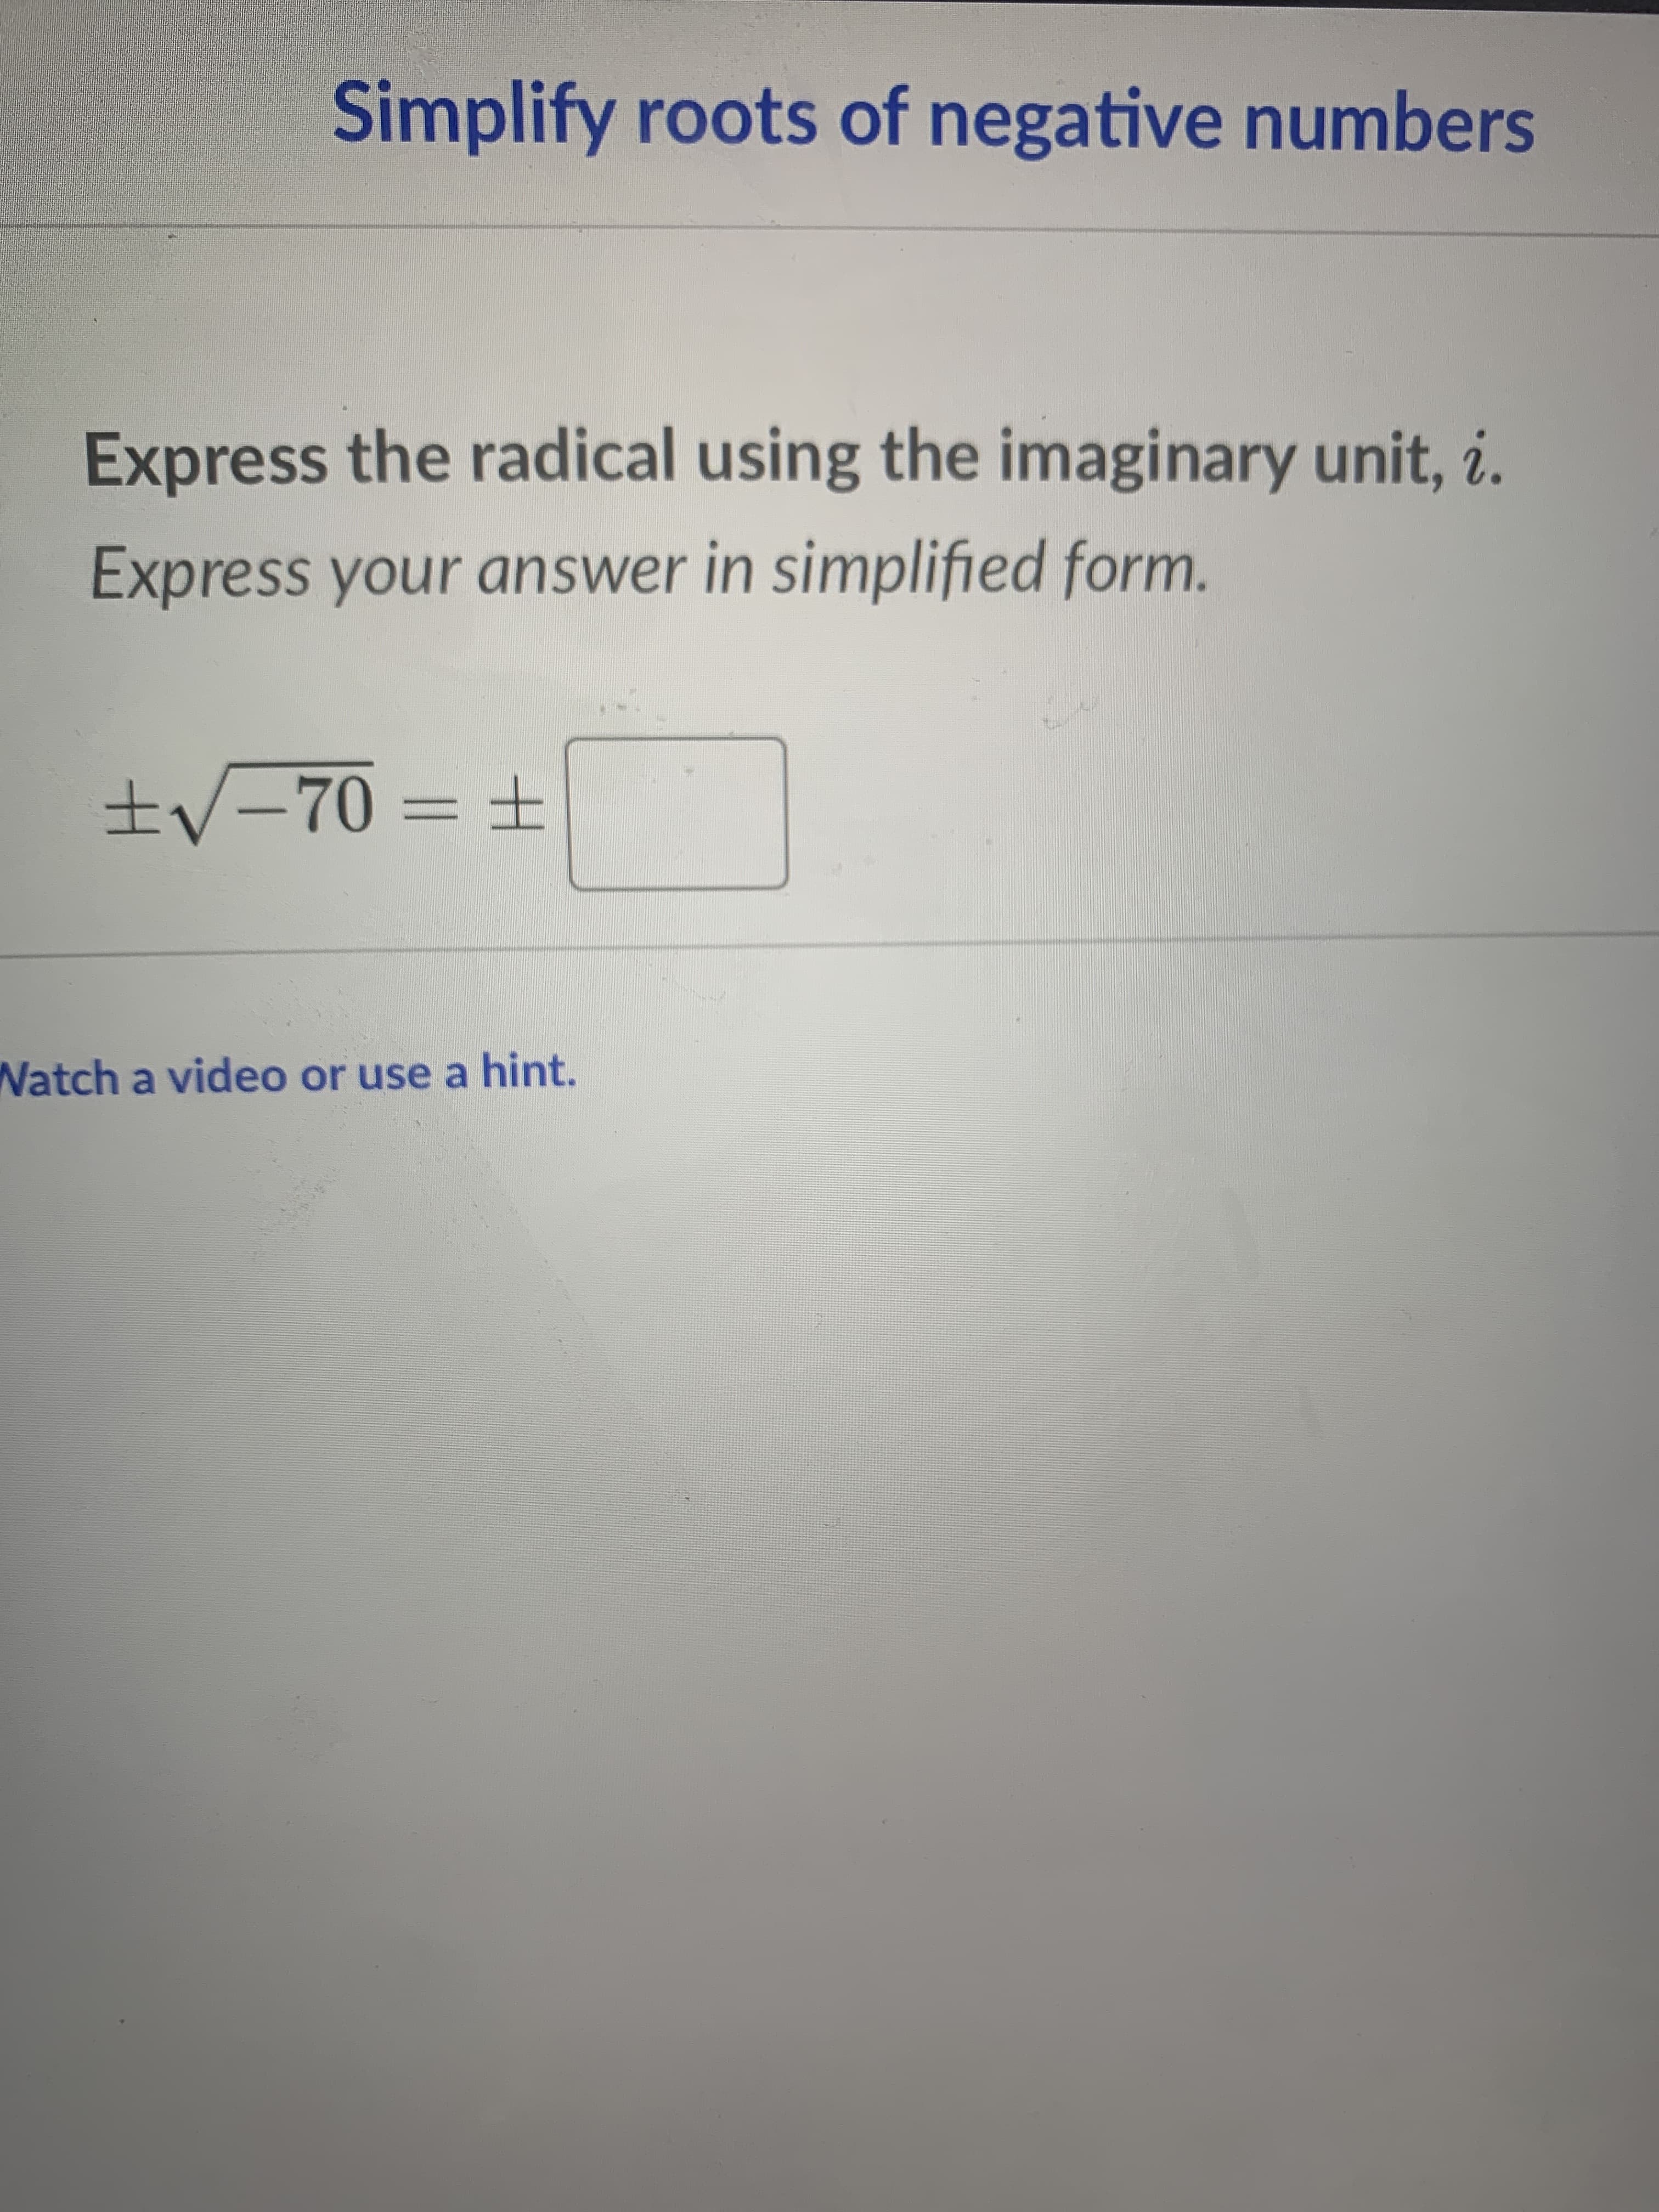 Express the radical using the imaginary unit, i.
Express your answer in simplified form.
±V-70 =±
